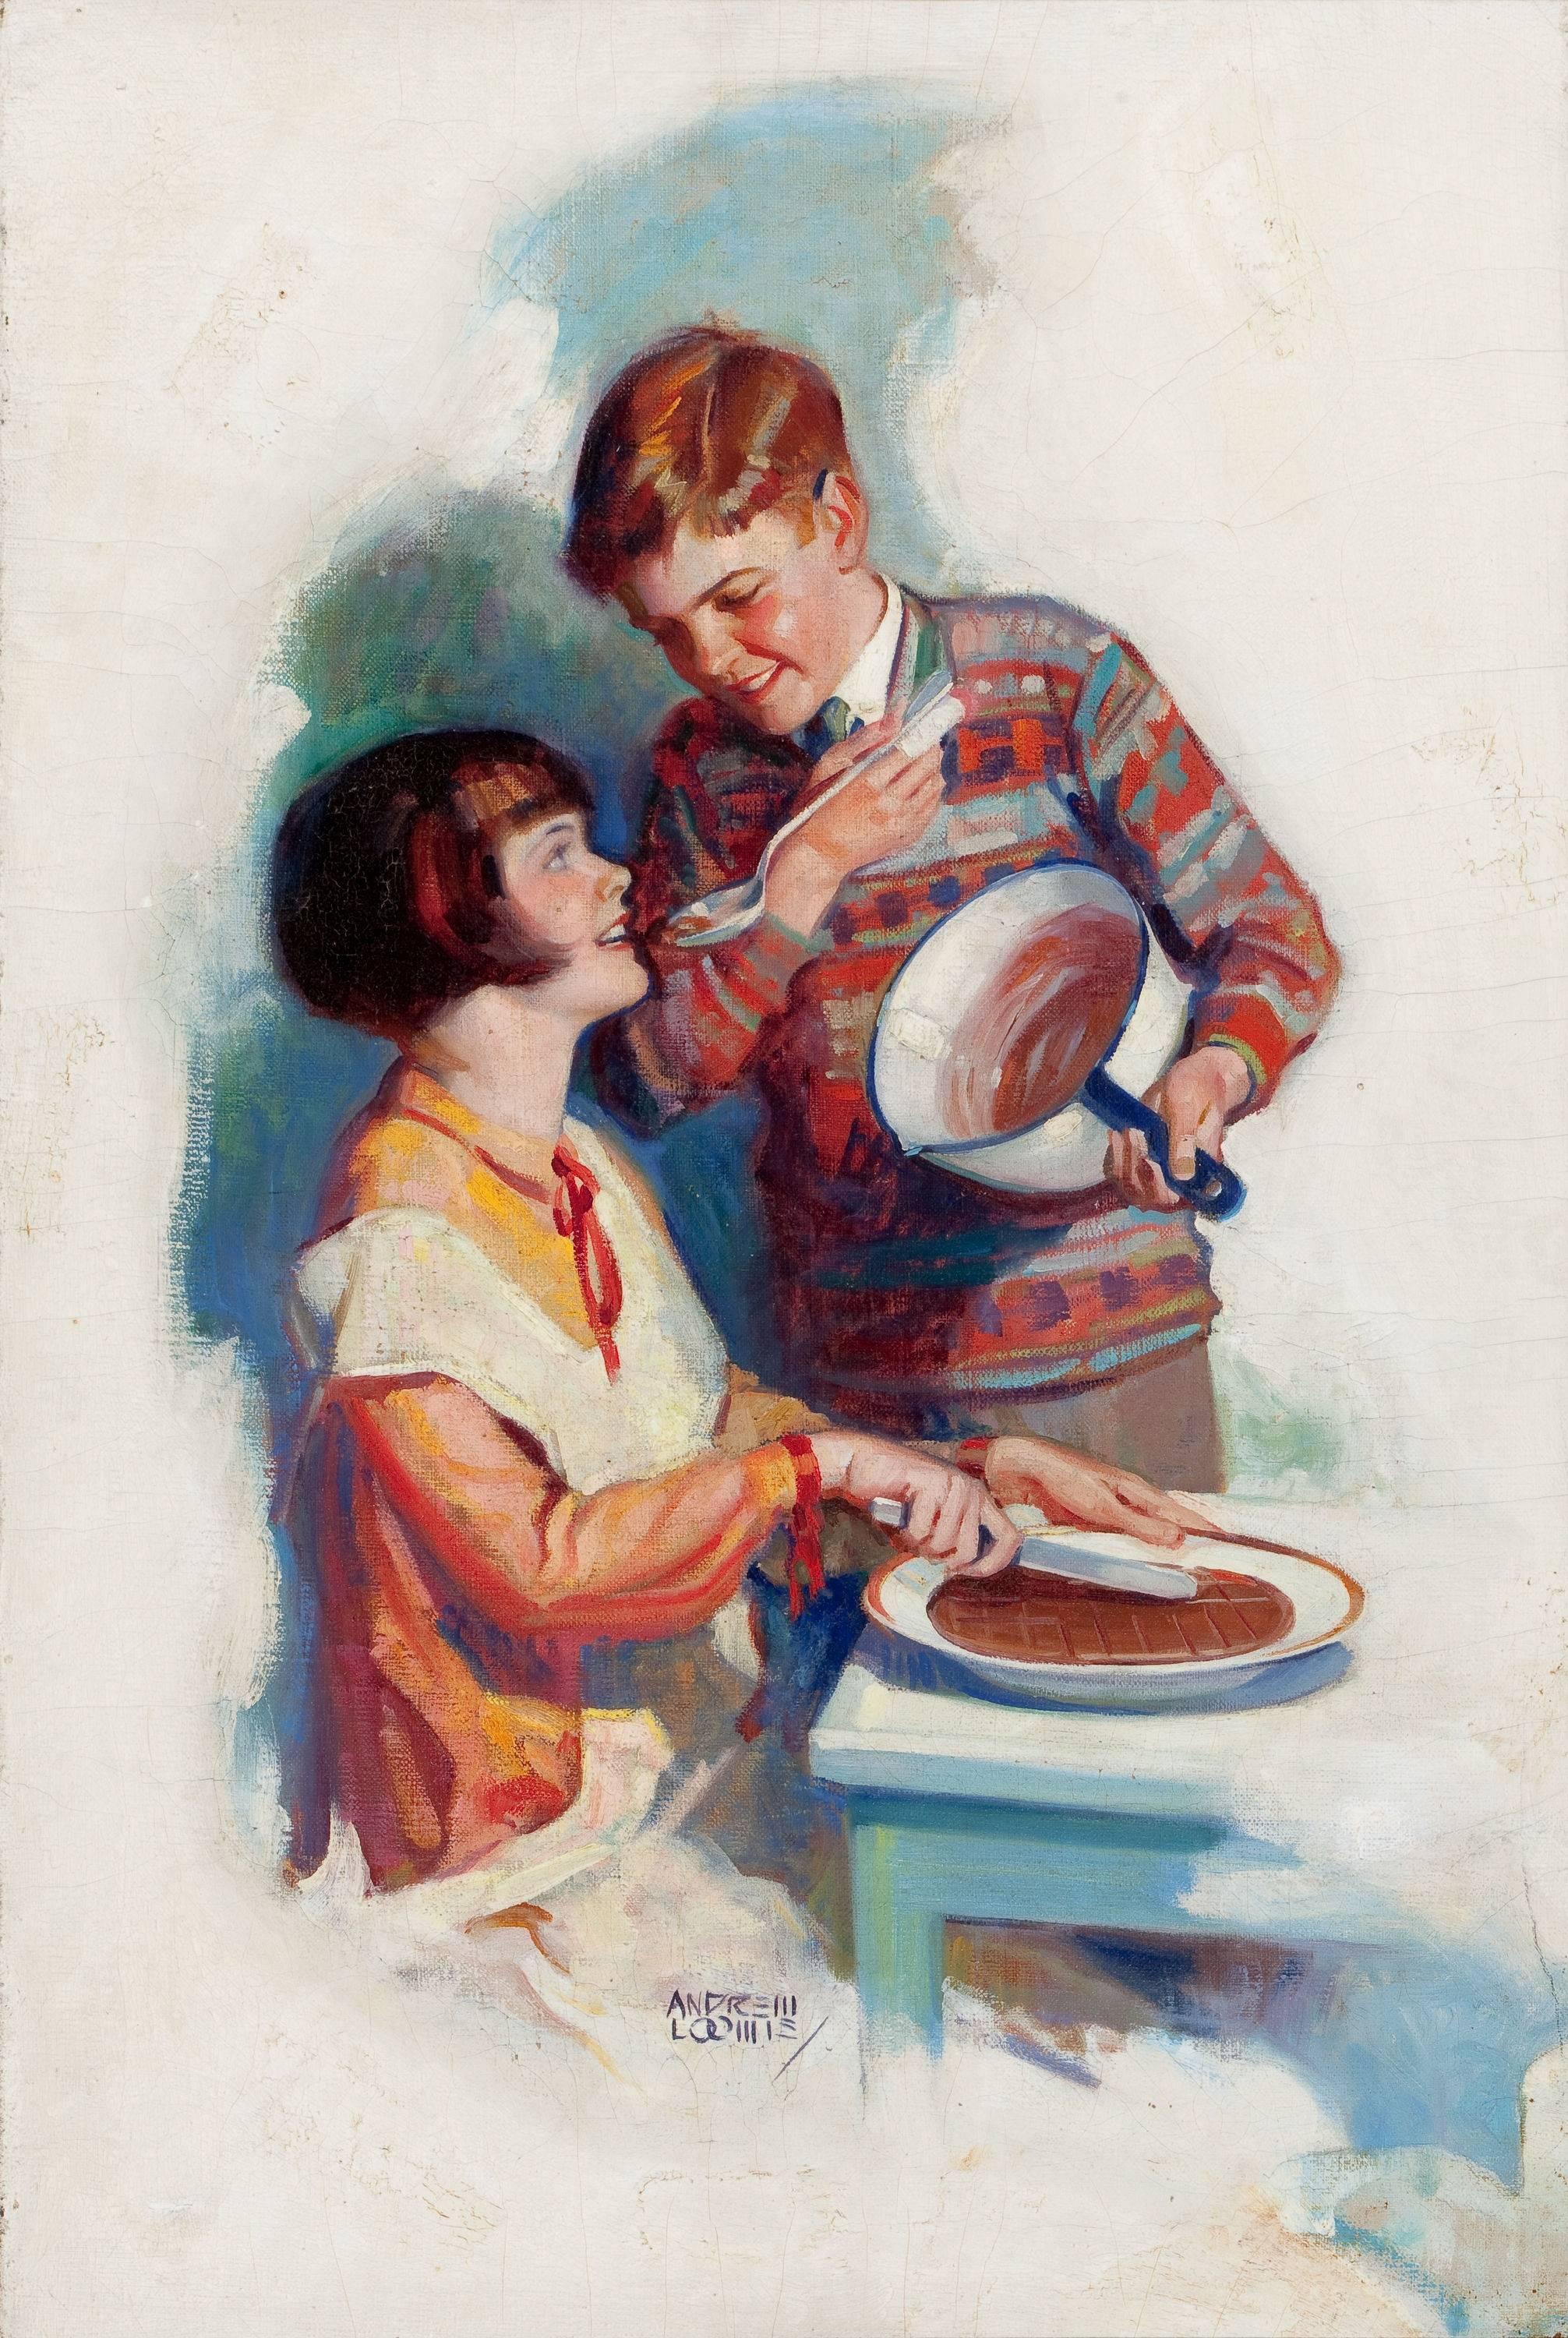 In The Making, Pet Milk Company Advertisement - Painting by Andrew Loomis